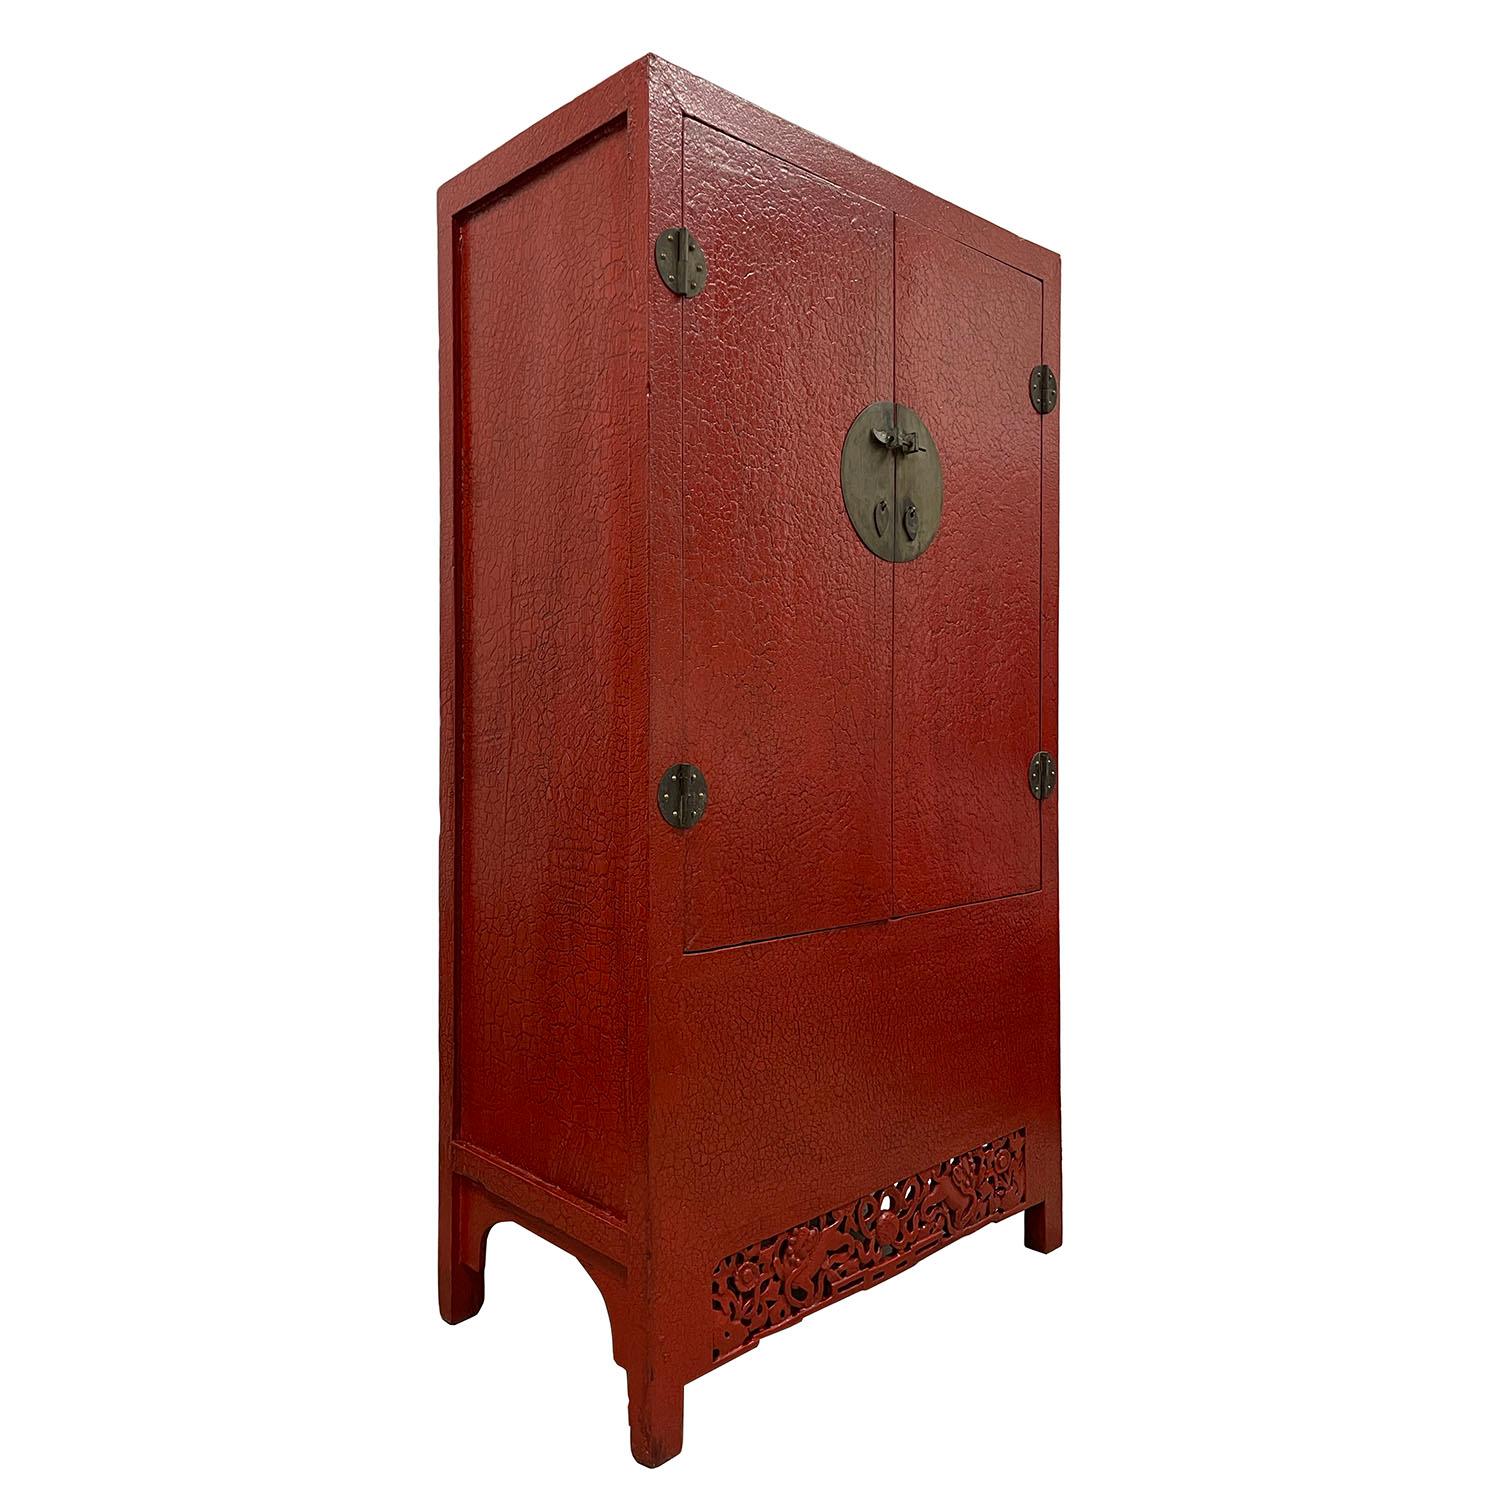 

Size: 77in H x 42in W x 22.5in D
Door opening: 46.5in H x 37in W
Origin: China
Circa: 1850 - 1900
Material: Wood
Condition: Original finished. Well balanced. solid wood construction, very heavy, sturdy, normal age wear.

Very well constructed with